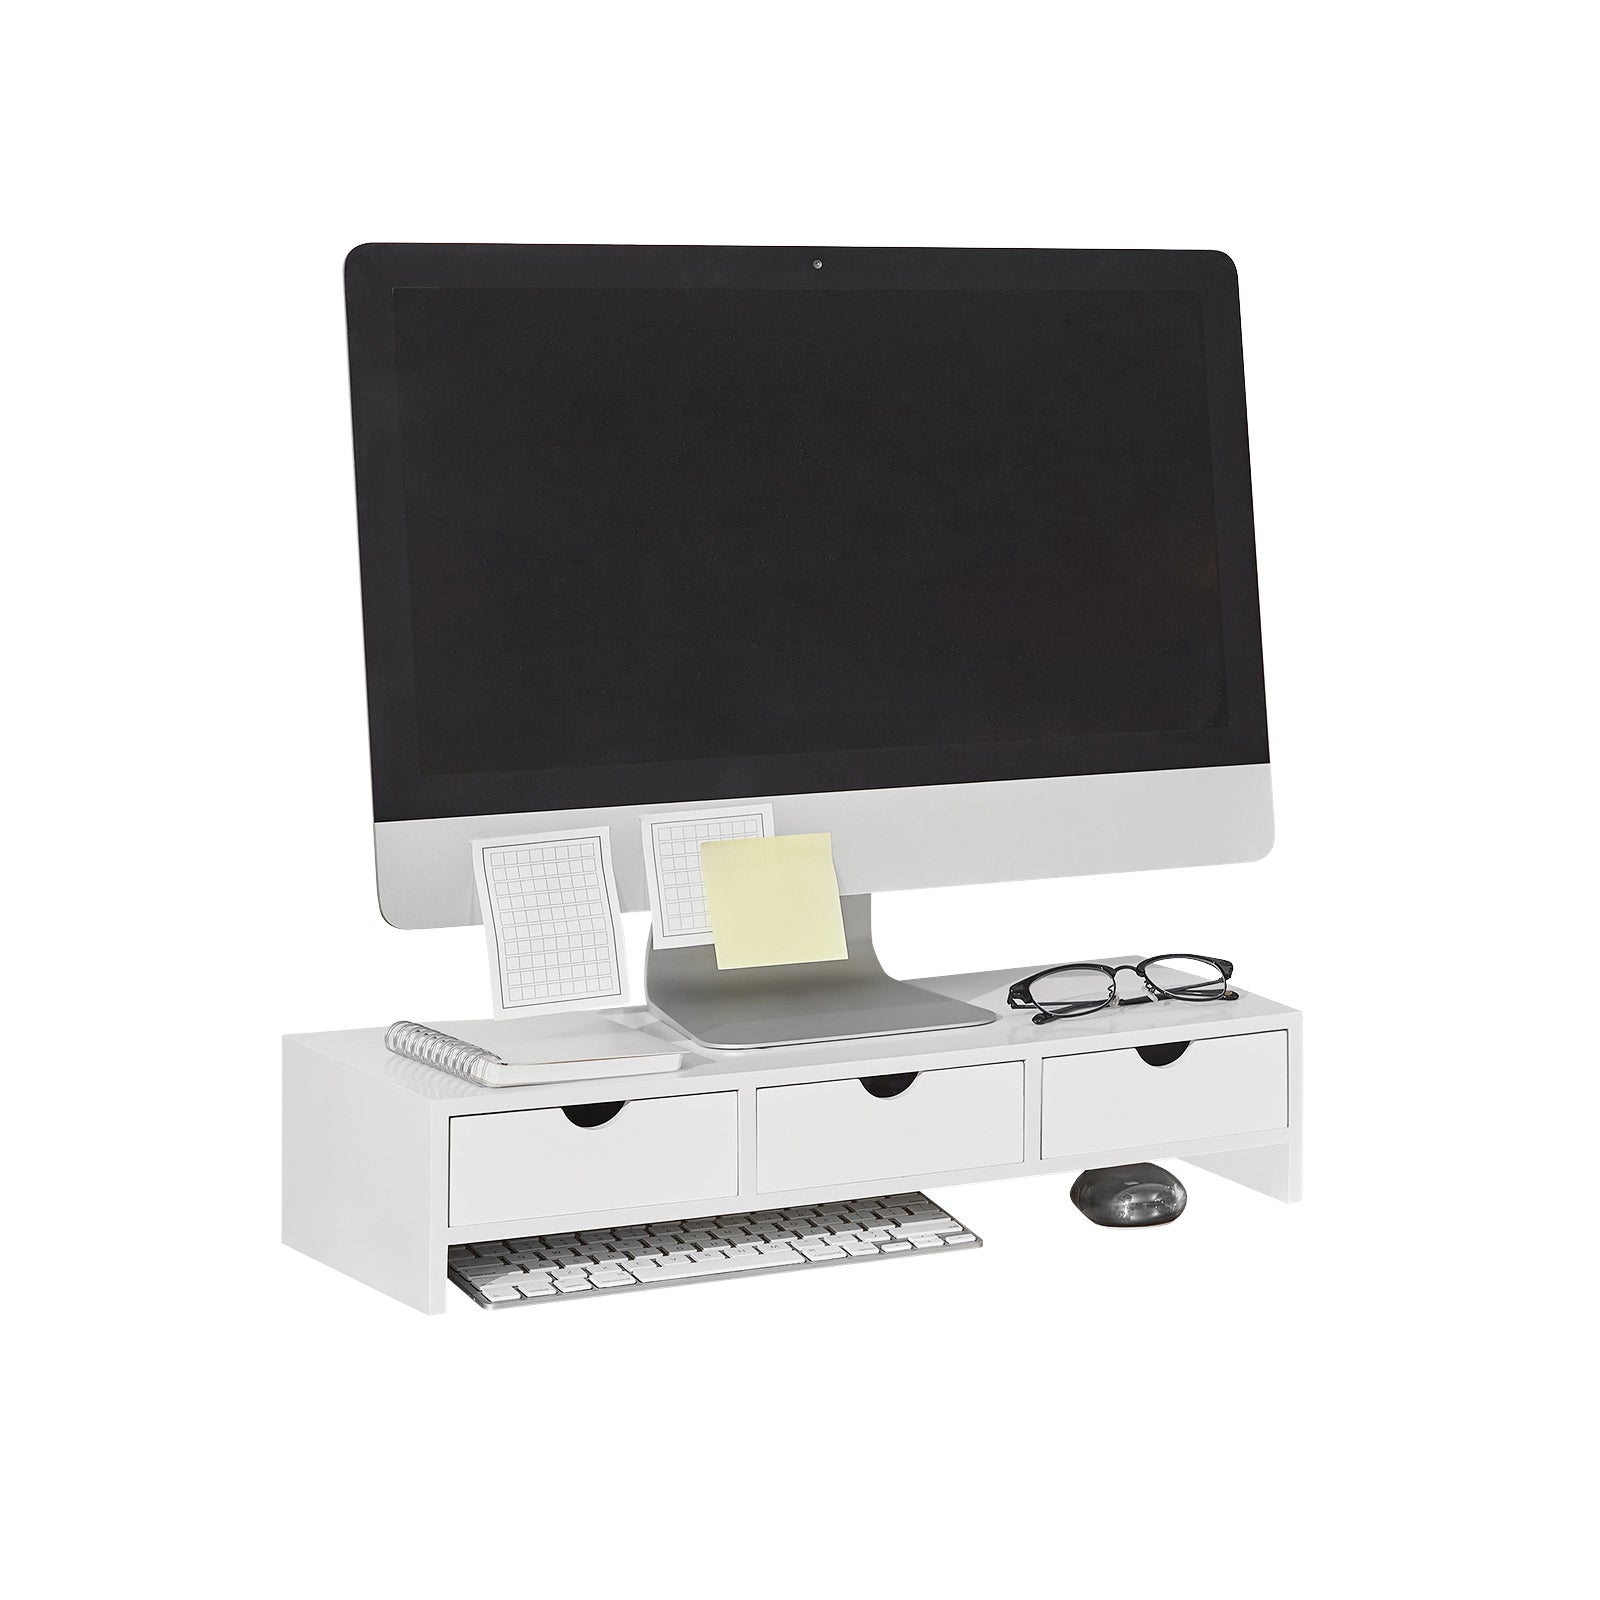 SoBuy BBF03-W, Monitor Stand Computer Screen Monitor Stand Monitor Riser Desk Organizer with 3 Drawers